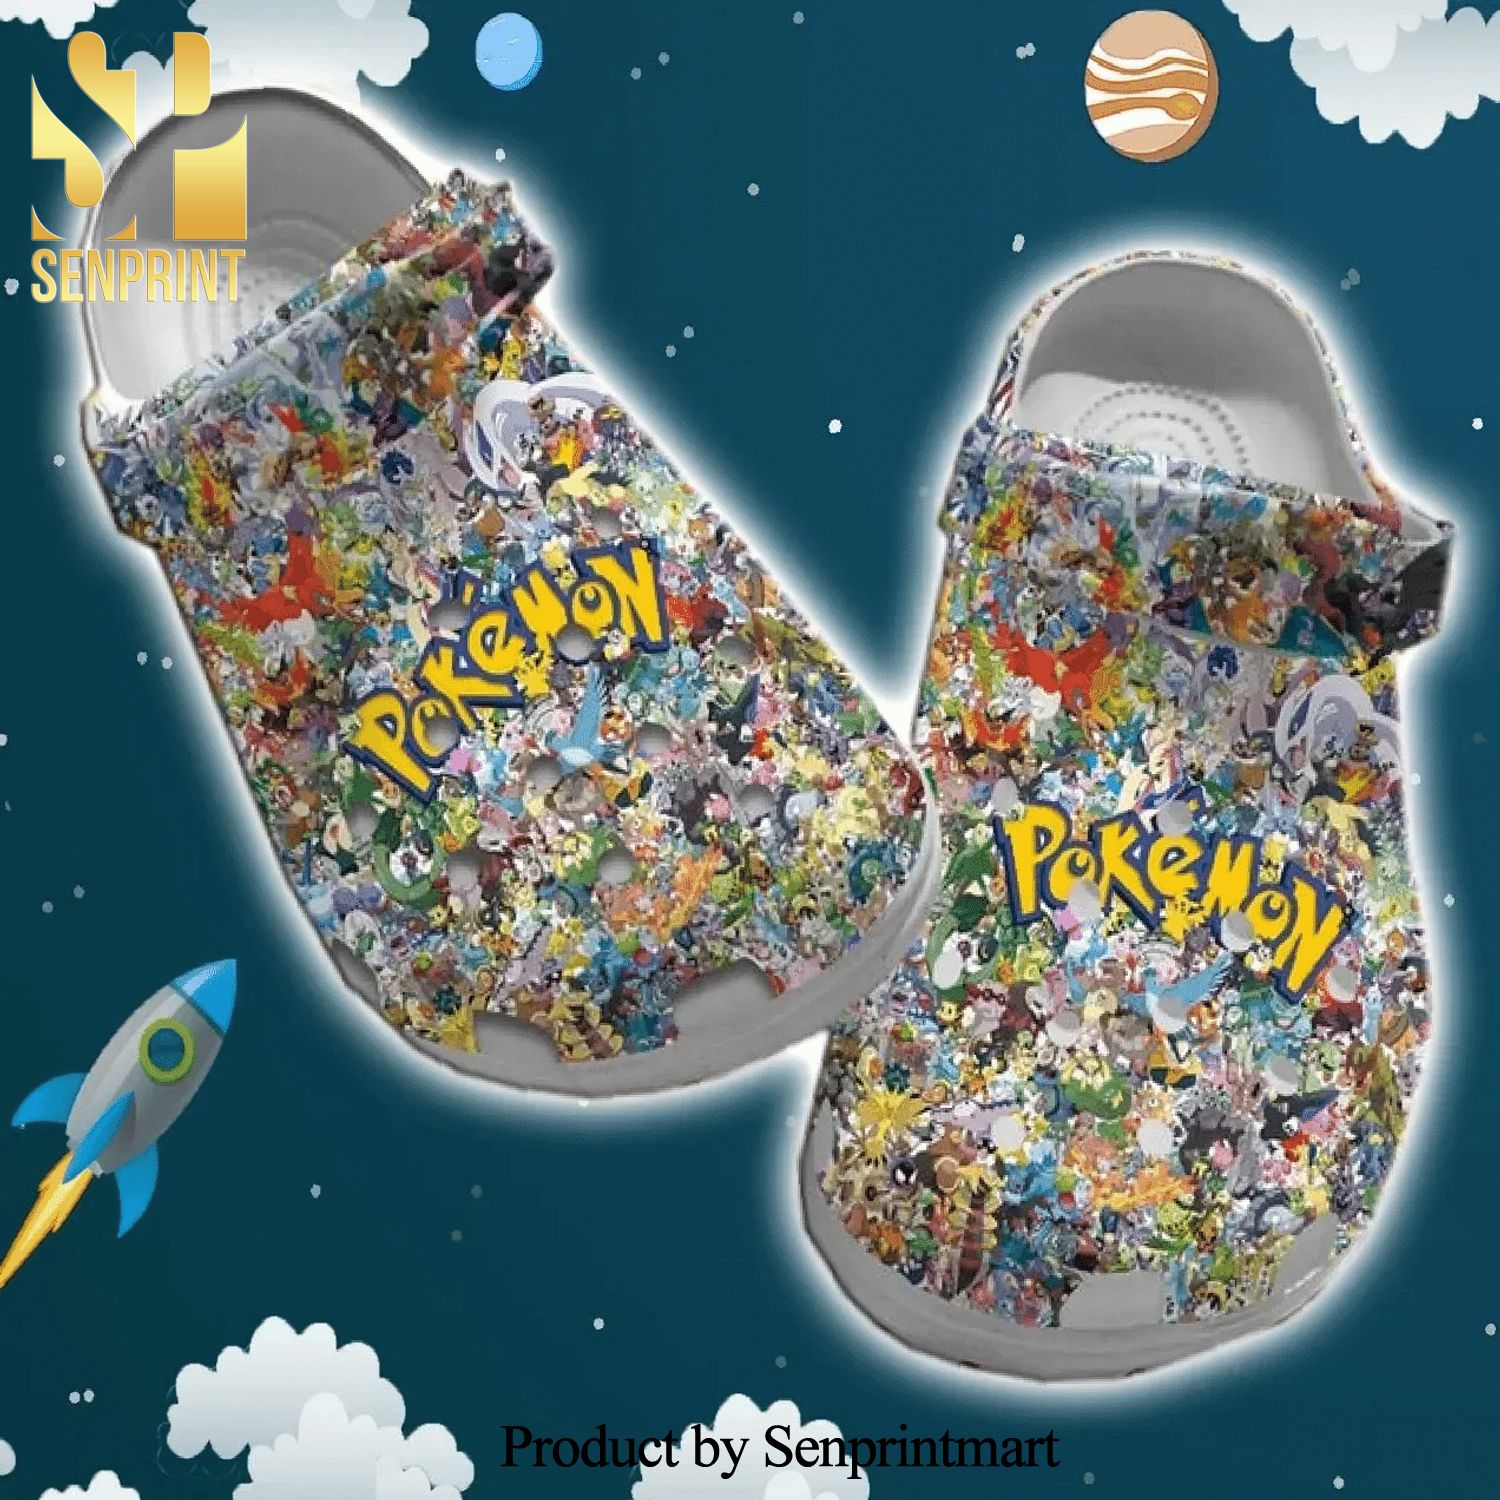 Icon Pokemon For Lover Rubber Classic Crocs Crocband Clog